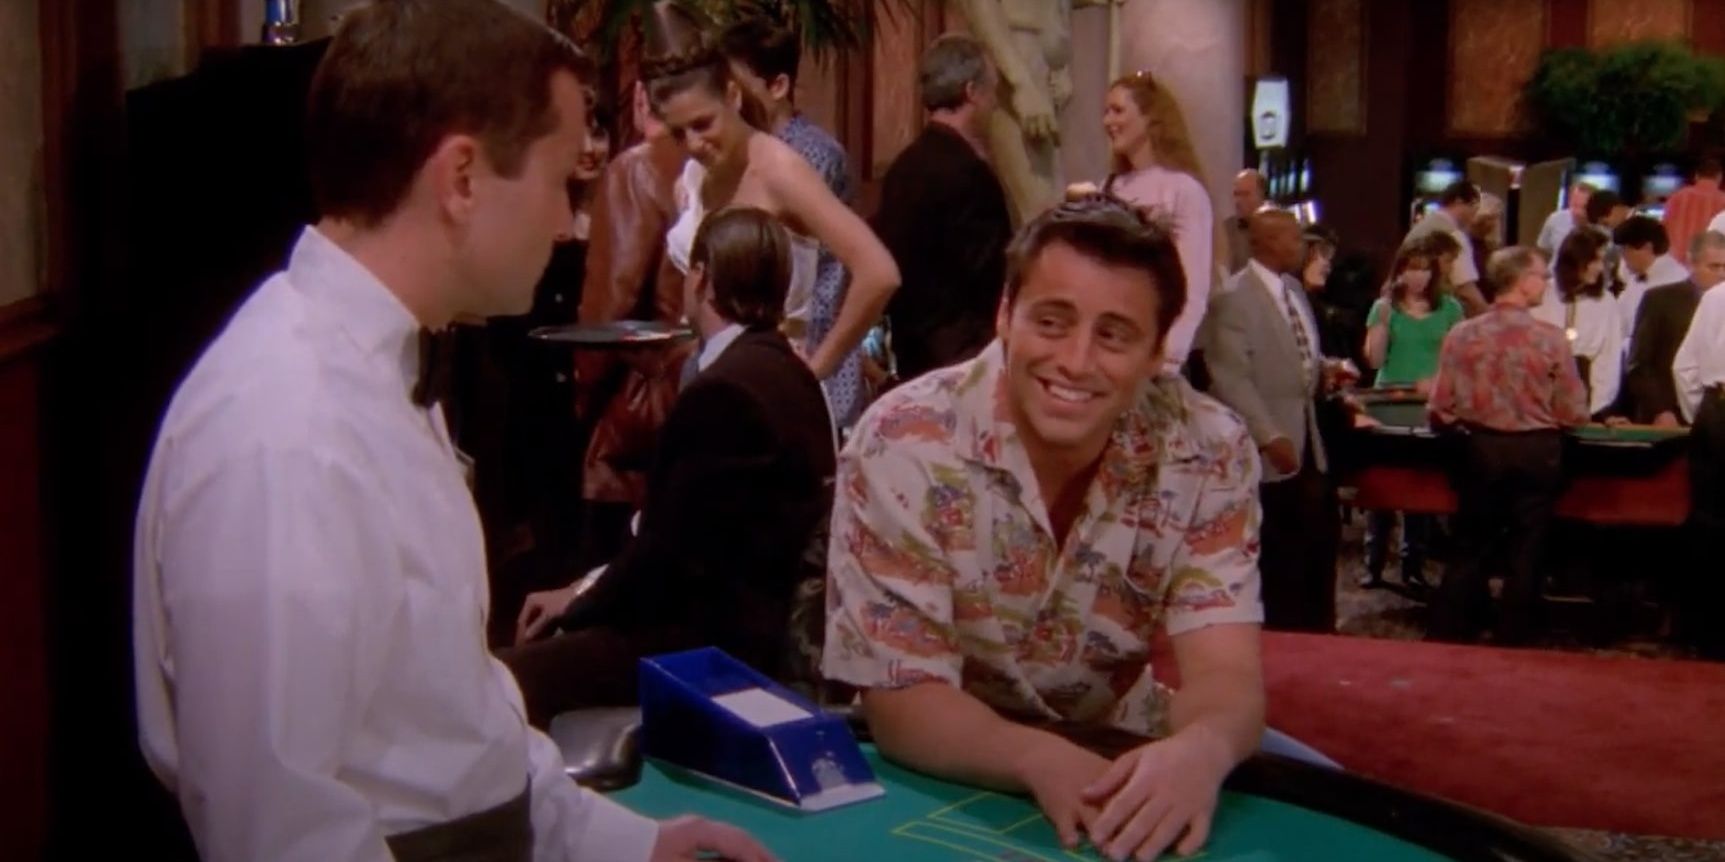 Joey talks to a croupier in a casino